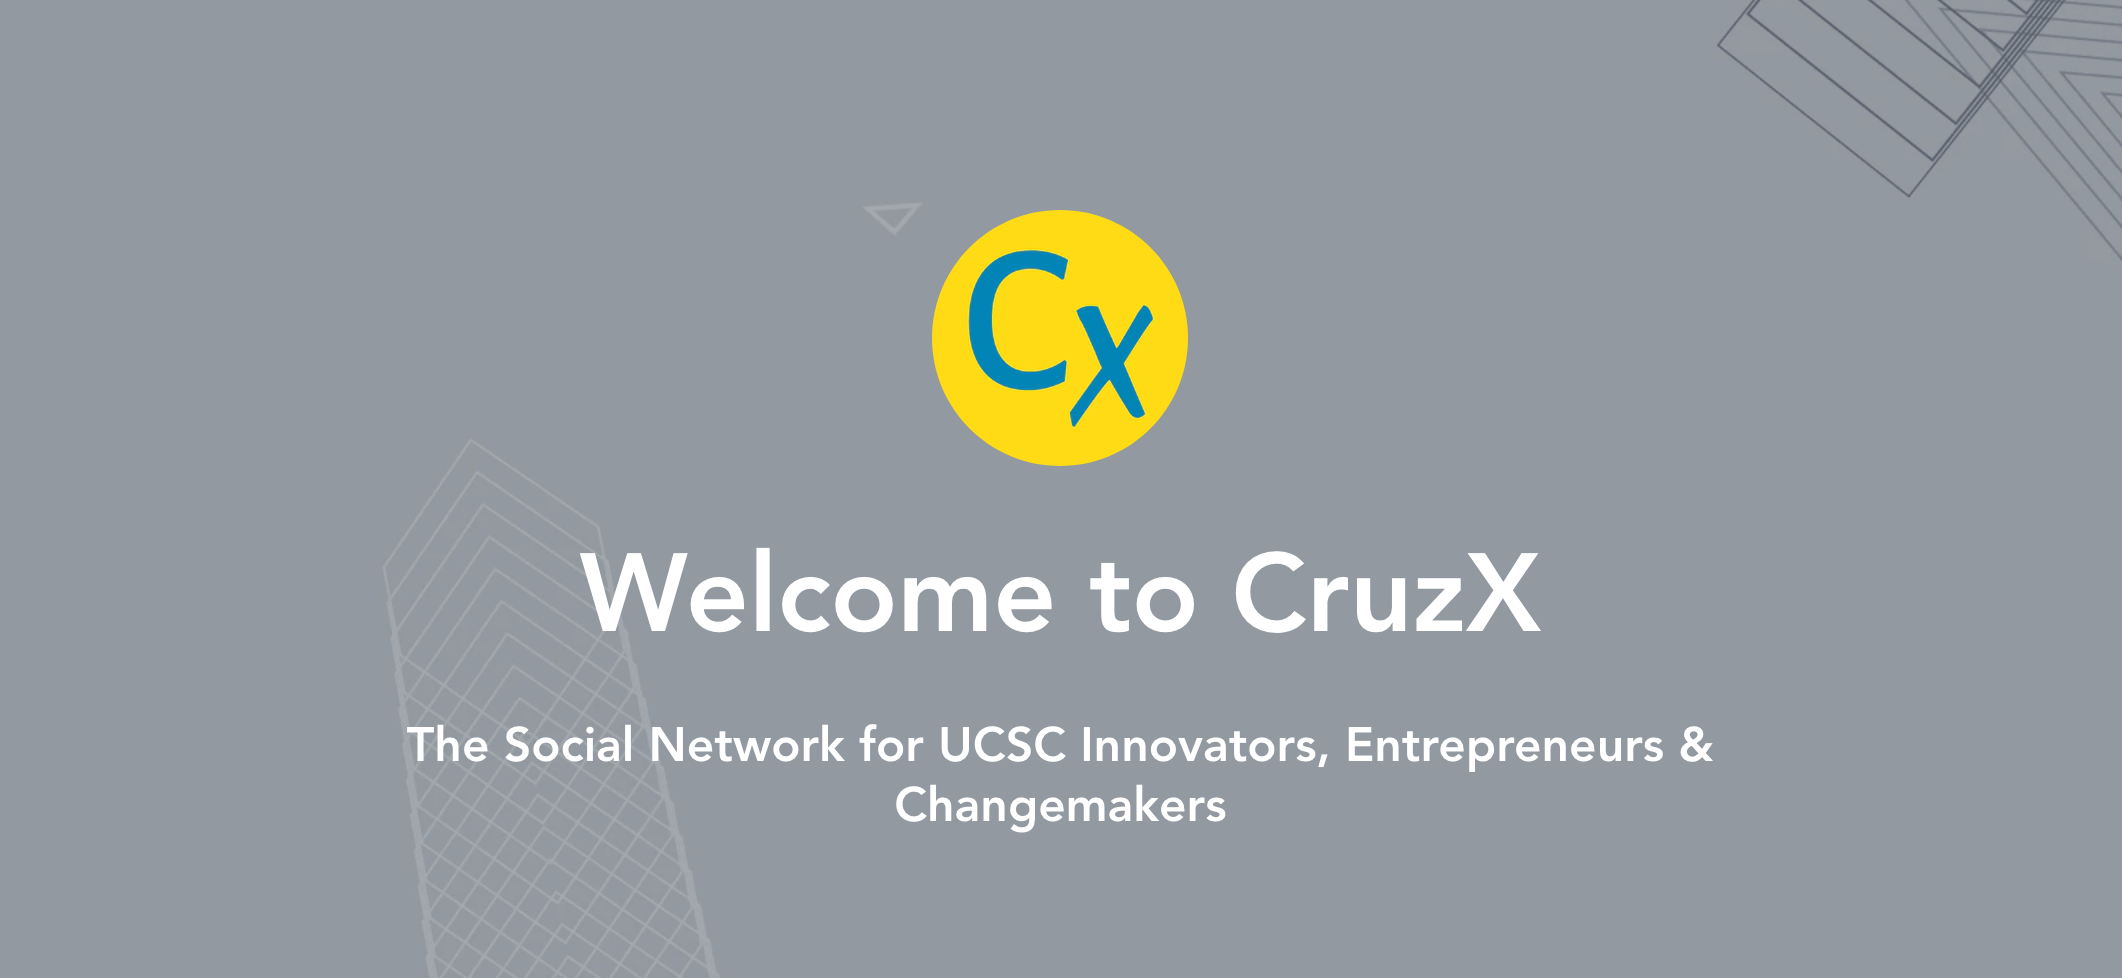 Introduction to CruzX The Social Network for UCSC Innovators, Entrepreneurs & Changemakers